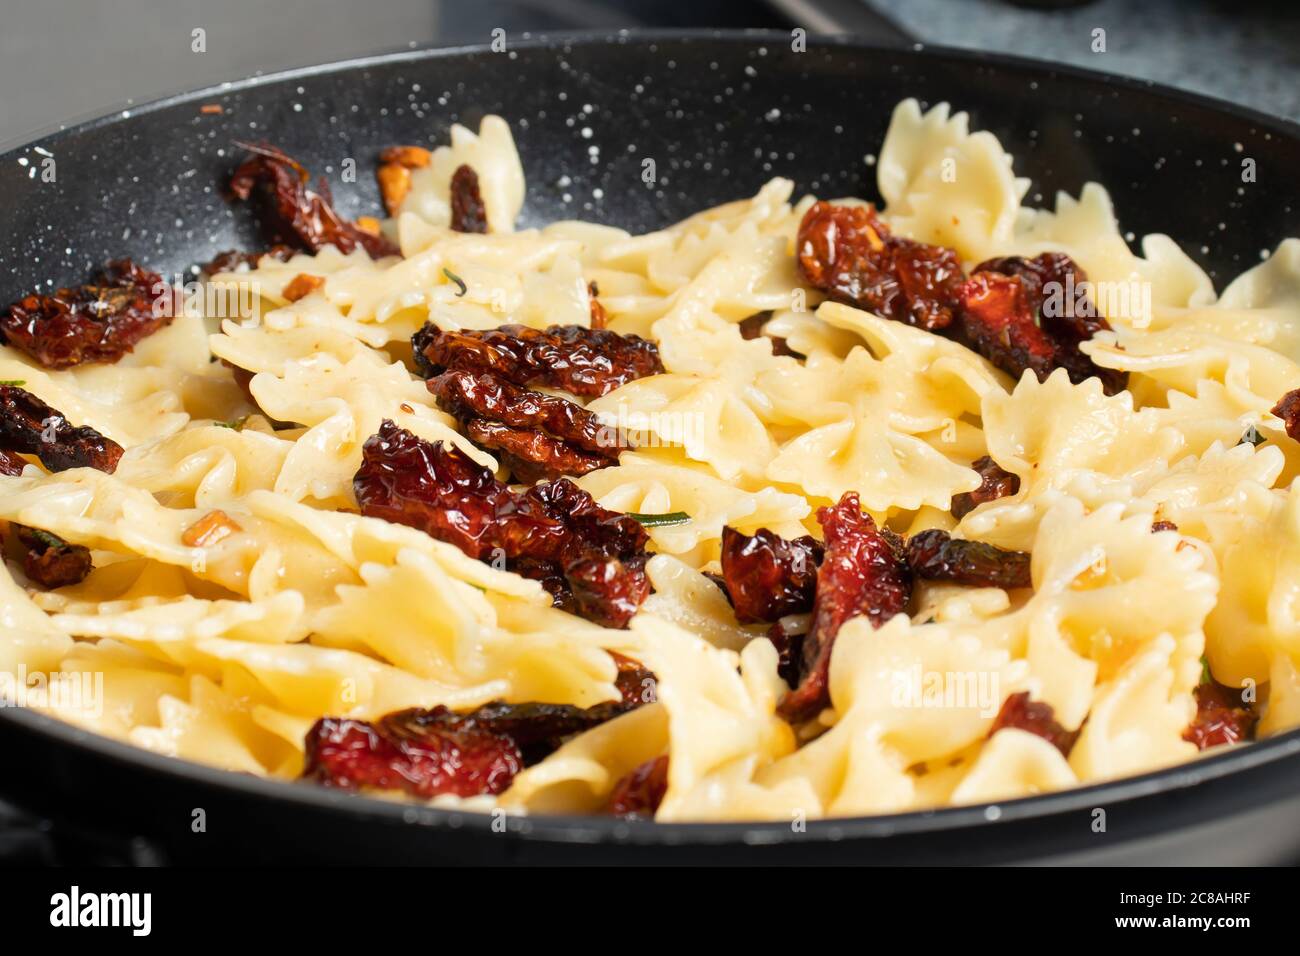 Pan-fried pasta with sun-dried tomatoes and garlic. Stages of cooking Italian cuisine Stock Photo